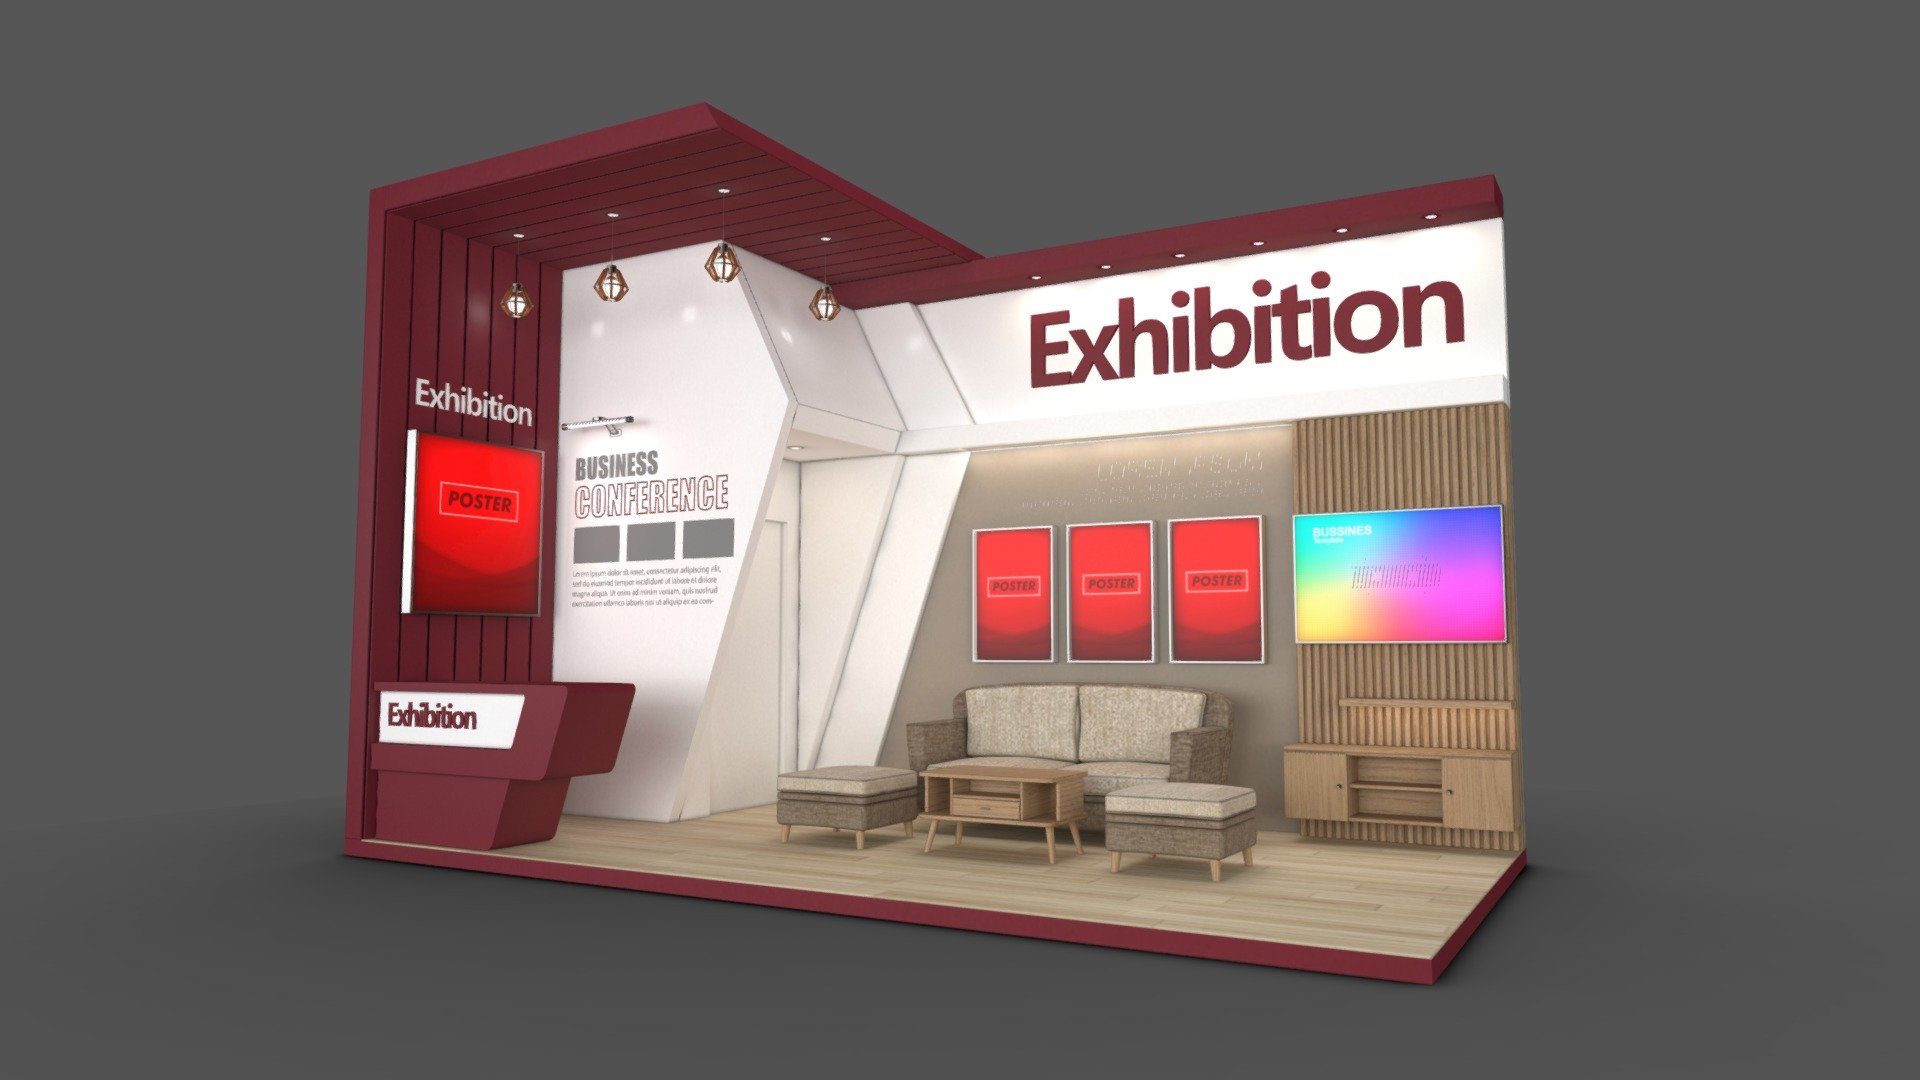 Booth Design 3D Model

Layout: 6x3m - 18 Sqm - 2 Exposed sides - max height: 3,95m

Unit: cm

additional File:





Model_2303_3Ds max 2020 / Vray 5




Model_2303_3Ds max 2017 / Default Render




Model_2303_Fbx Standard map




Model_2303_Fbx V ray complete map




Model_2303_Obj Standard map




Model_2303_Obj V ray complete map



thank you for visiting

If you are interested in other models, please visit my collection



EXHIBITION STAND 36 Sqm
https://sketchfab.com/fasih.lisan/collections/exhibition-stand-36-sqm-34b6419aa7ec4556b18d8a381c51db77

EXHIBITION STAND 18 Sqm
https://sketchfab.com/fasih.lisan/collections/exhibition-stand-18-sqm-9a22add1012e4c36961b6e1db26a0280

EXHIBITION STAND 9 sqm
https://sketchfab.com/fasih.lisan/collections/exhibition-stand-9-sqm-2afc738a25634768ba5335da876876f2 - Model 2303 Booth Design - Buy Royalty Free 3D model by fasih.lisan 3d model